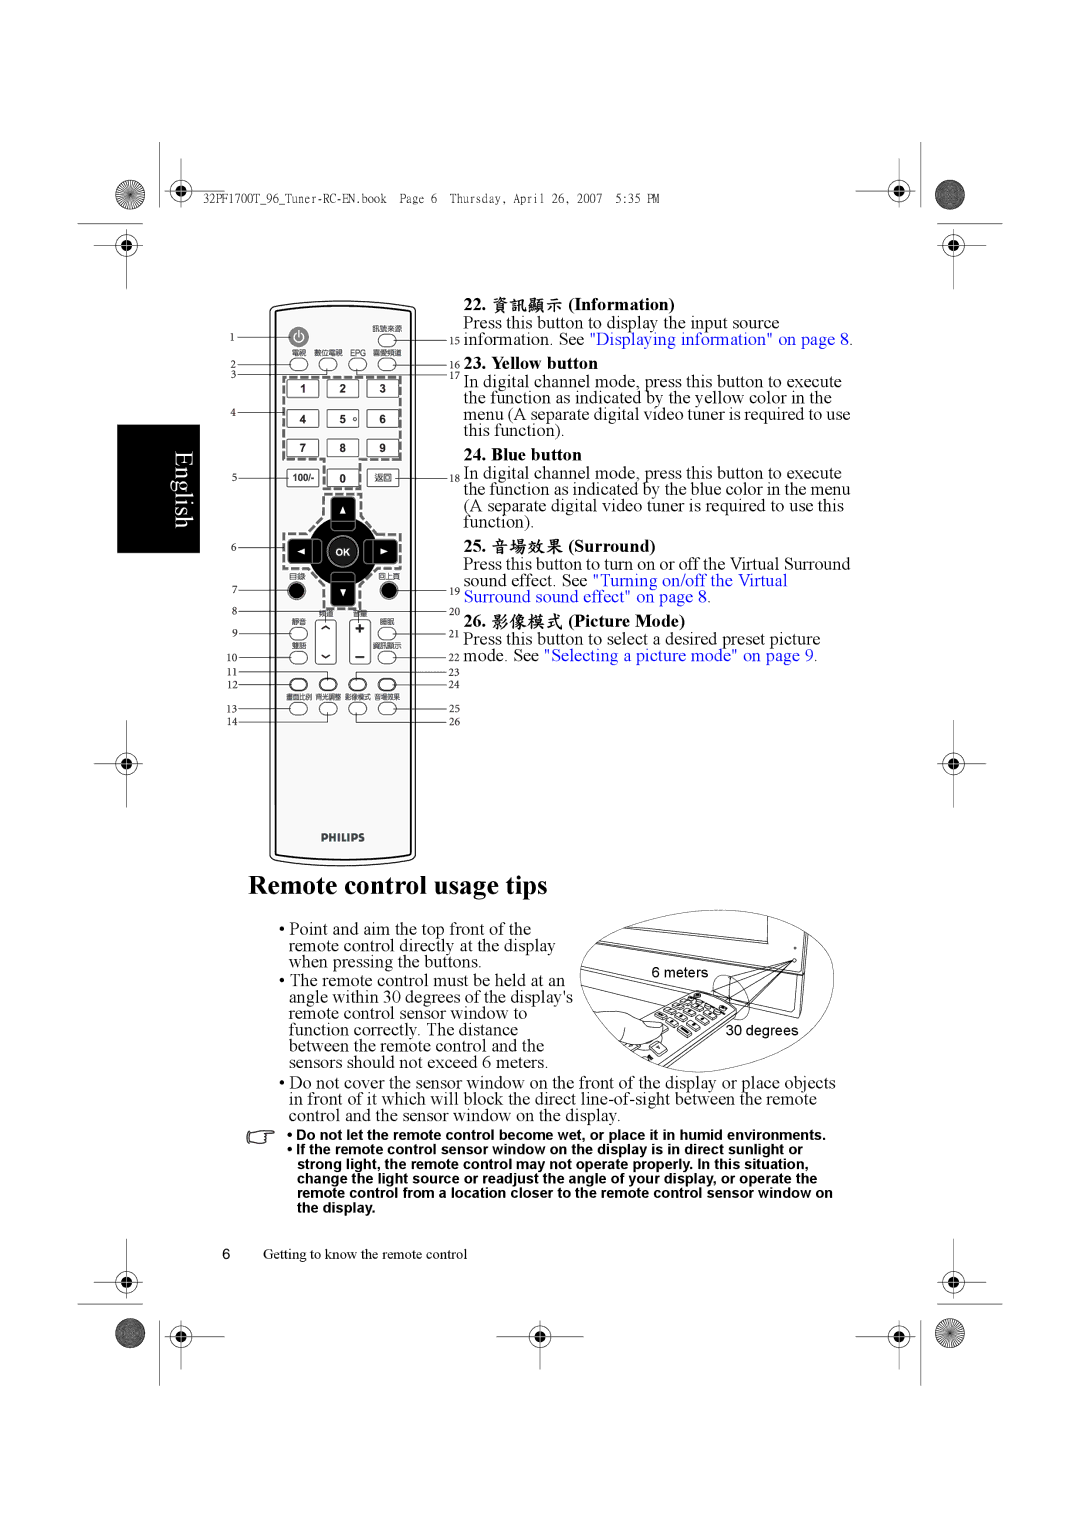 Philips 32PF1700T/96 manual Remote control usage tips 